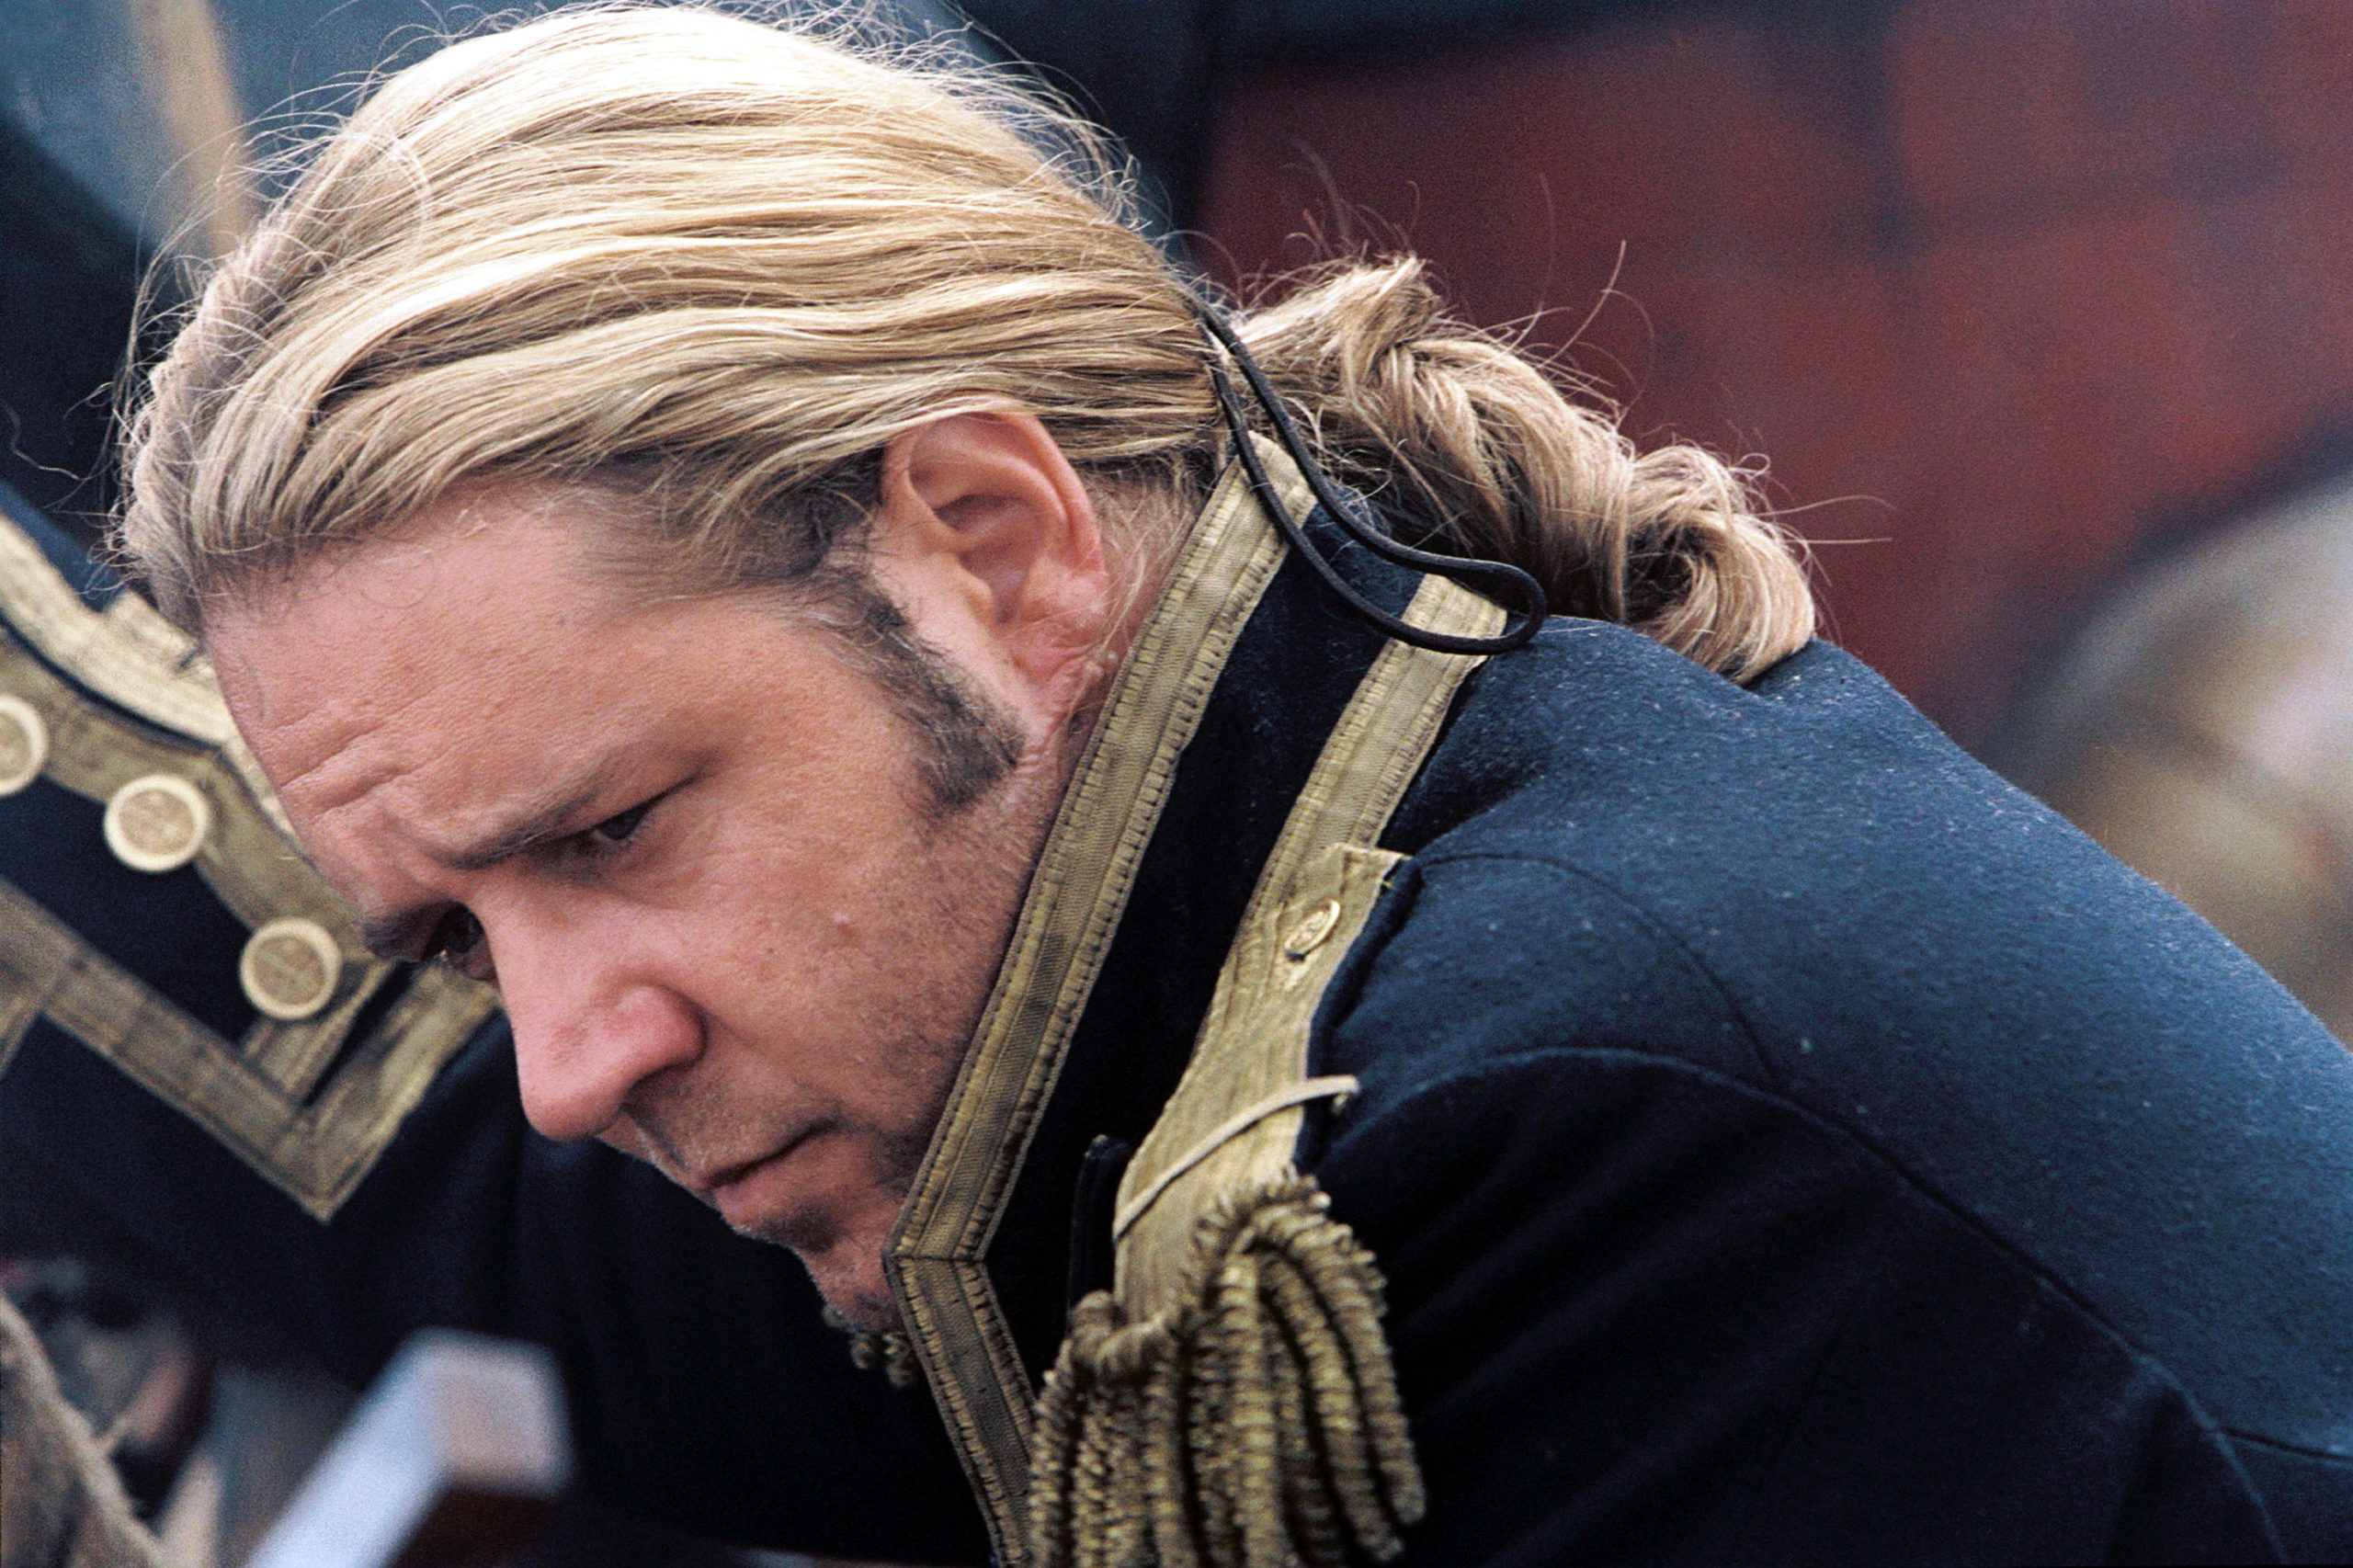 MASTER AND COMMANDER, Russell Crowe, 2003, TM & Copyright (c) 20th Century fox Film Corp. All rights